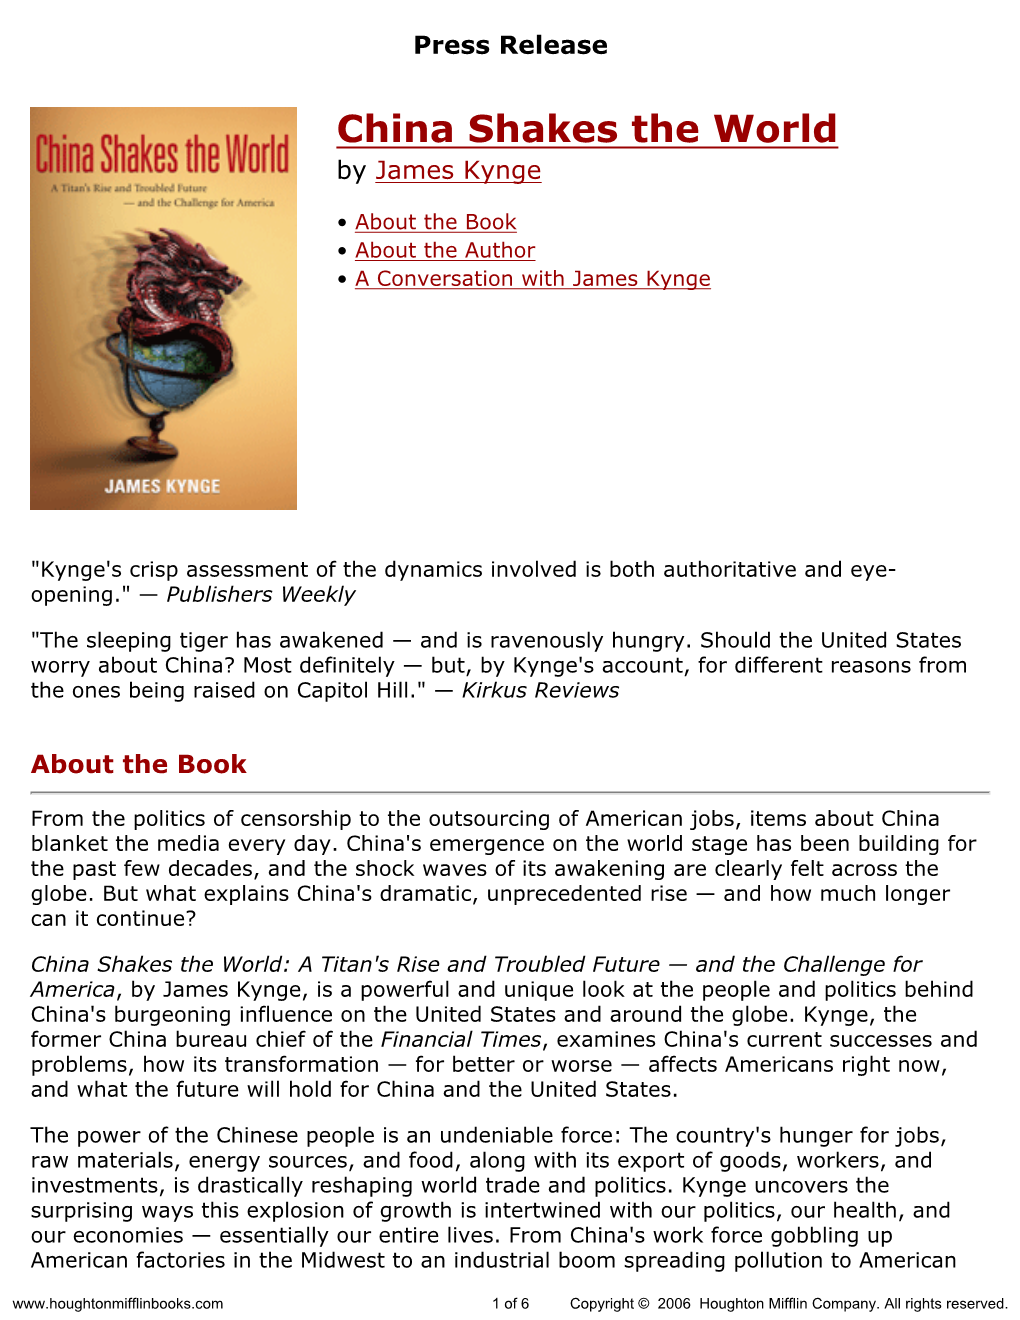 Press Release for China Shakes the World Published by Houghton